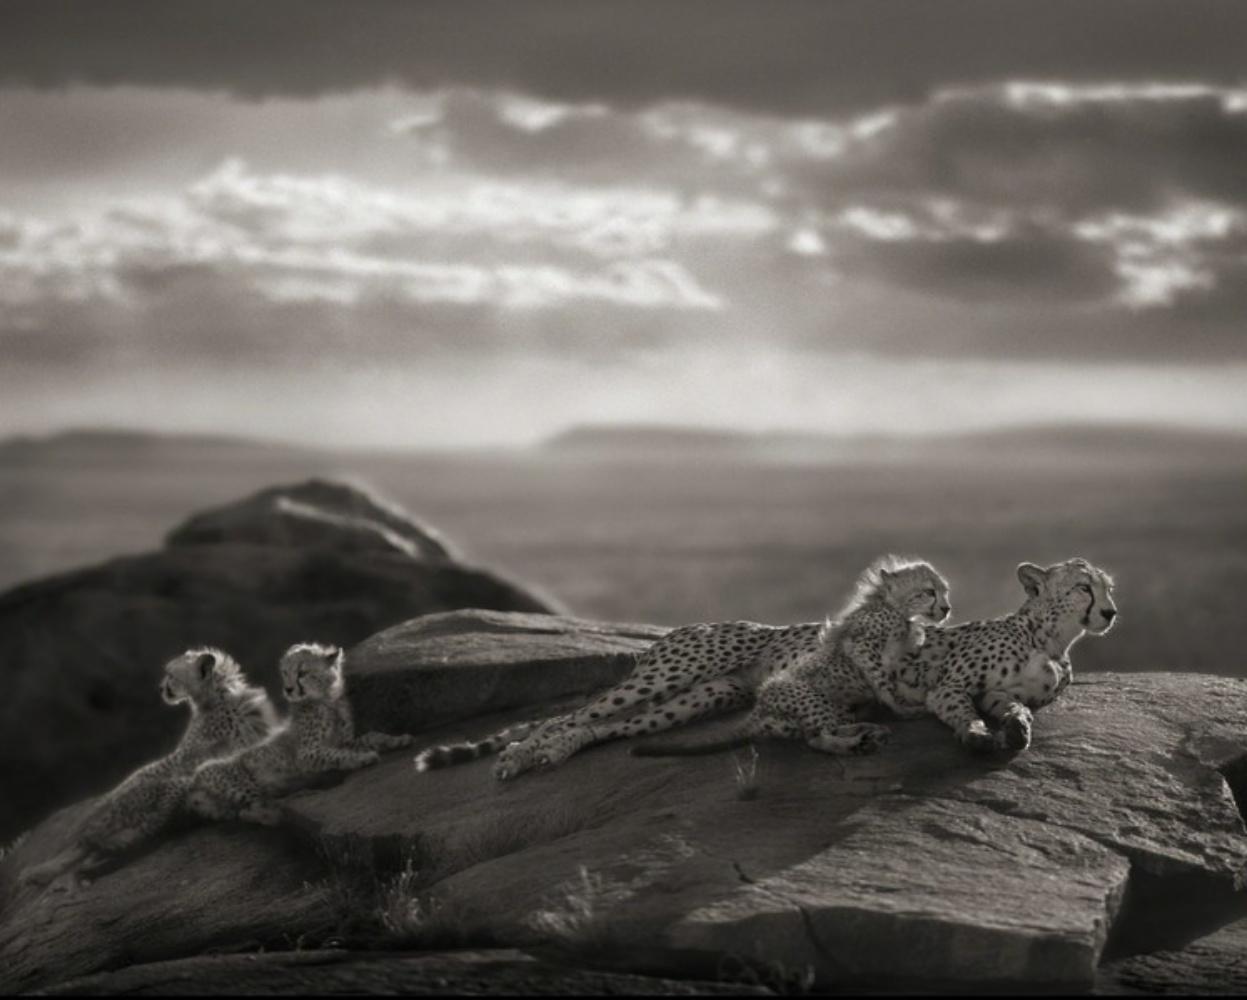 NICK BRANDT (*1966, England)
Cheetah & Cubs Lying on Rock, Serengeti
2007
Archival Pigment Print
Sheet 130.8 x 106.7 cm (51.5 x 42 in.)
Edition of 8, plus AP

Nick Brandt is a contemporary English photographer. His work focuses on the disappearing